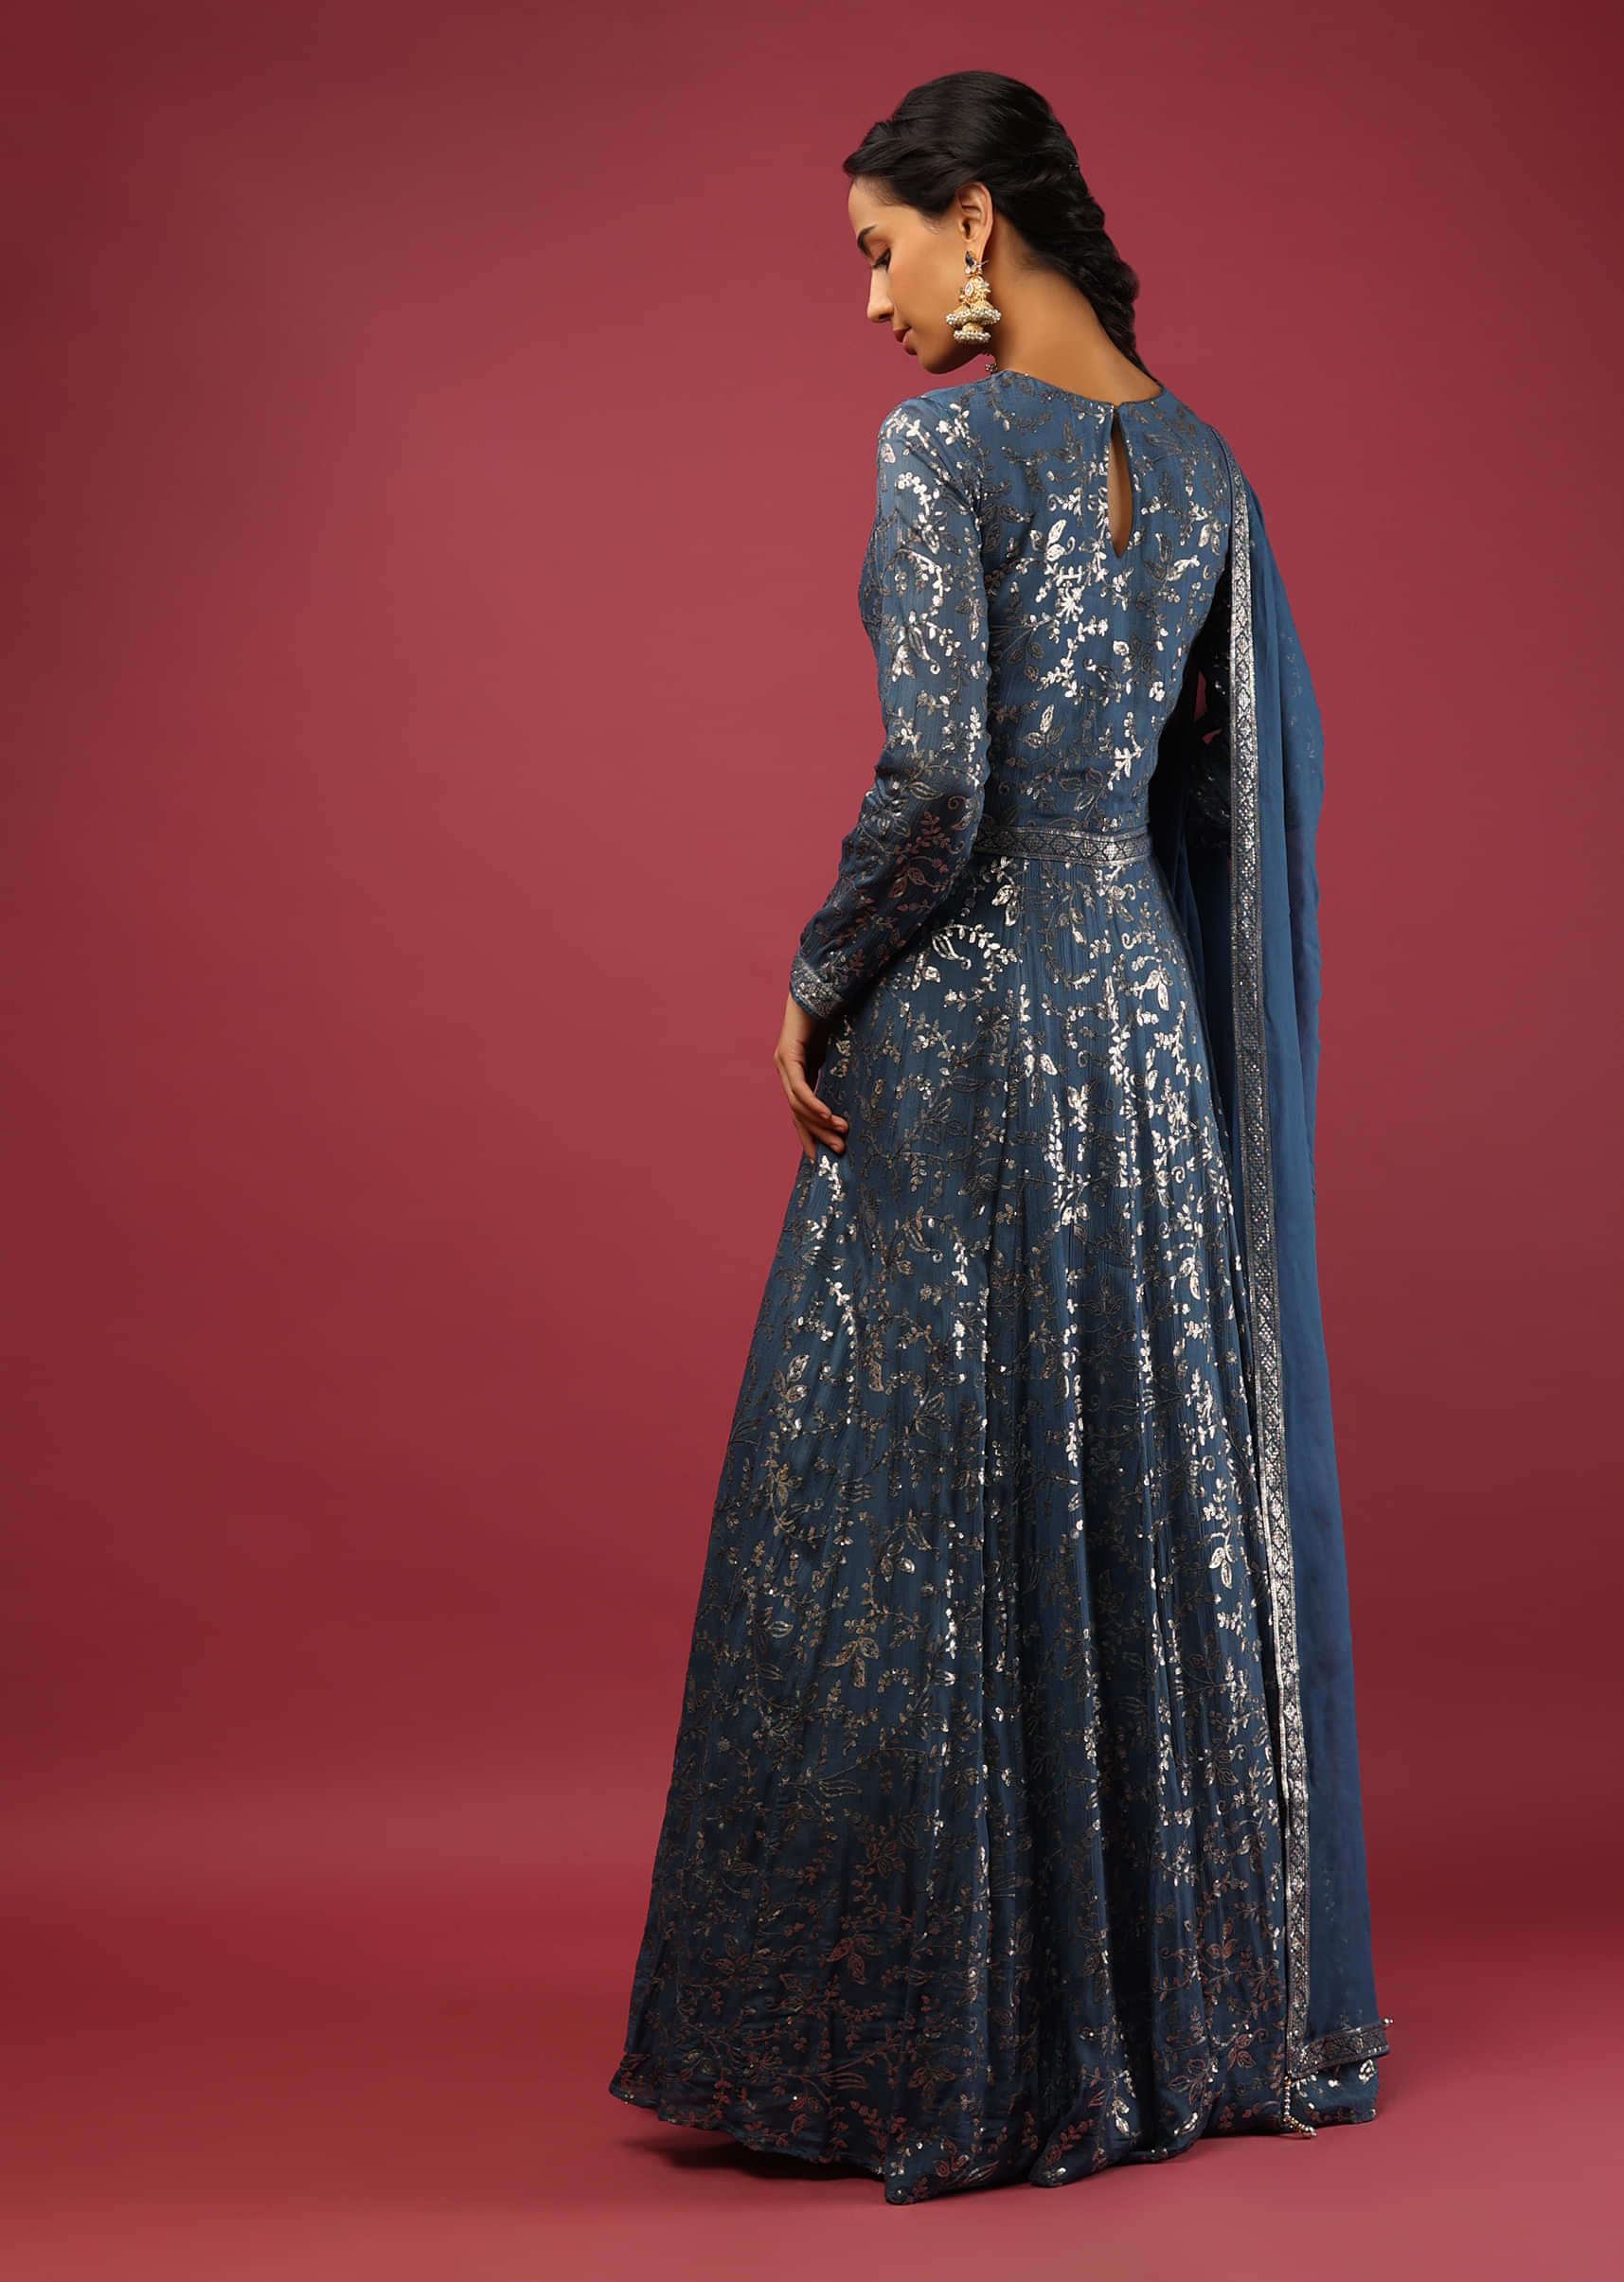 Stellar Blue Anarkali Suit In Chiffon With Sequins Embroidered Floral Jaal  